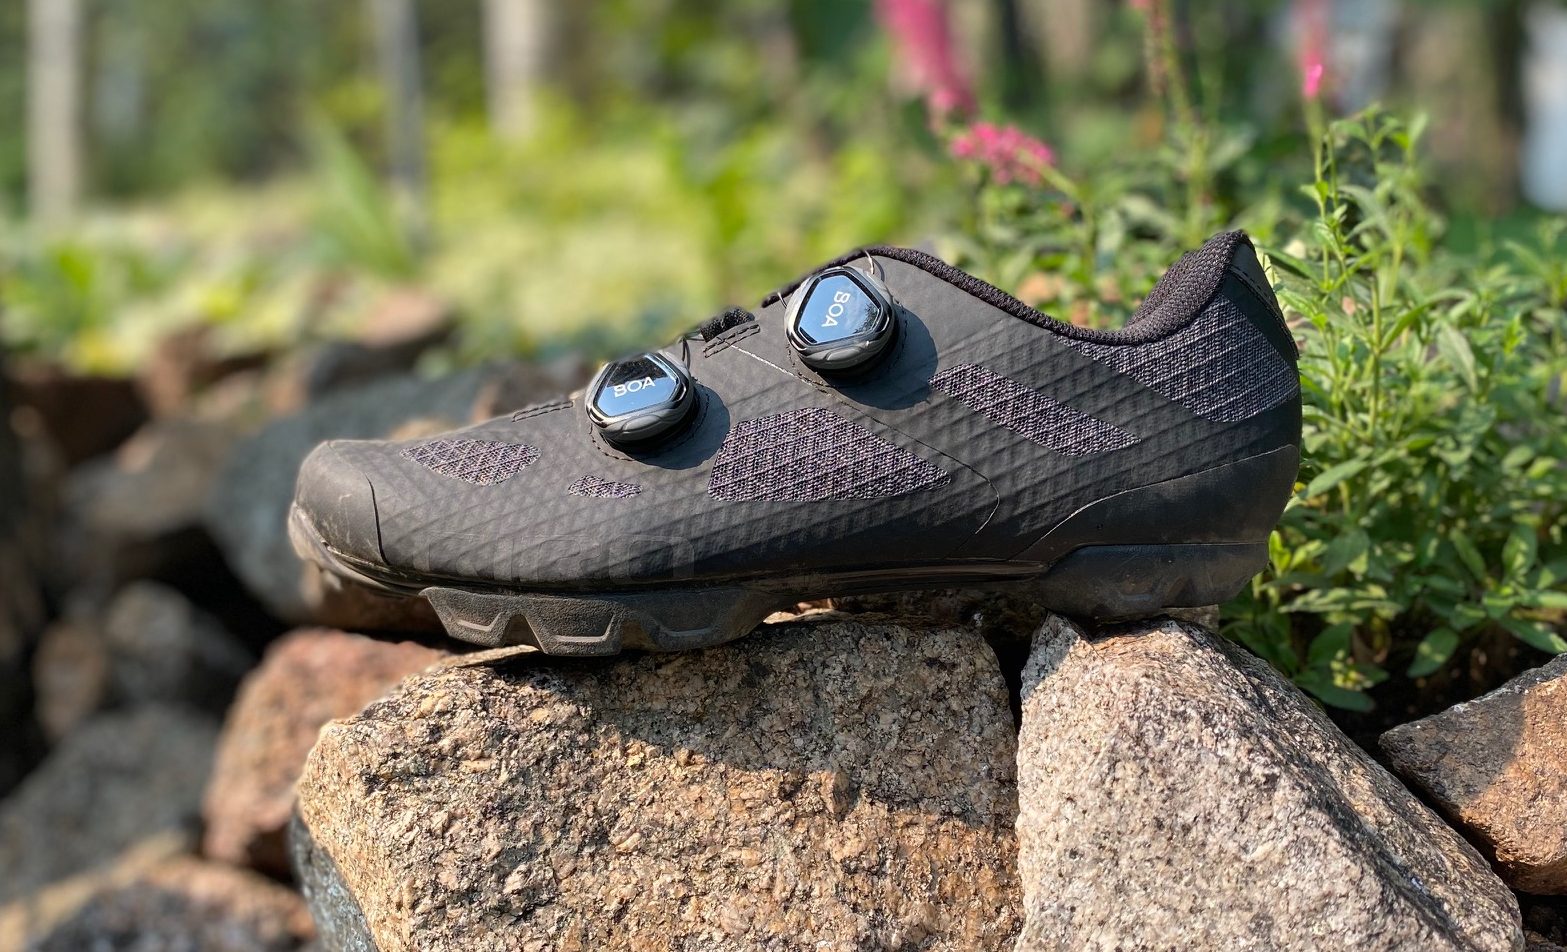 The Giro Sector is the Coolest MTB Shoe of the Season | Gear Institute